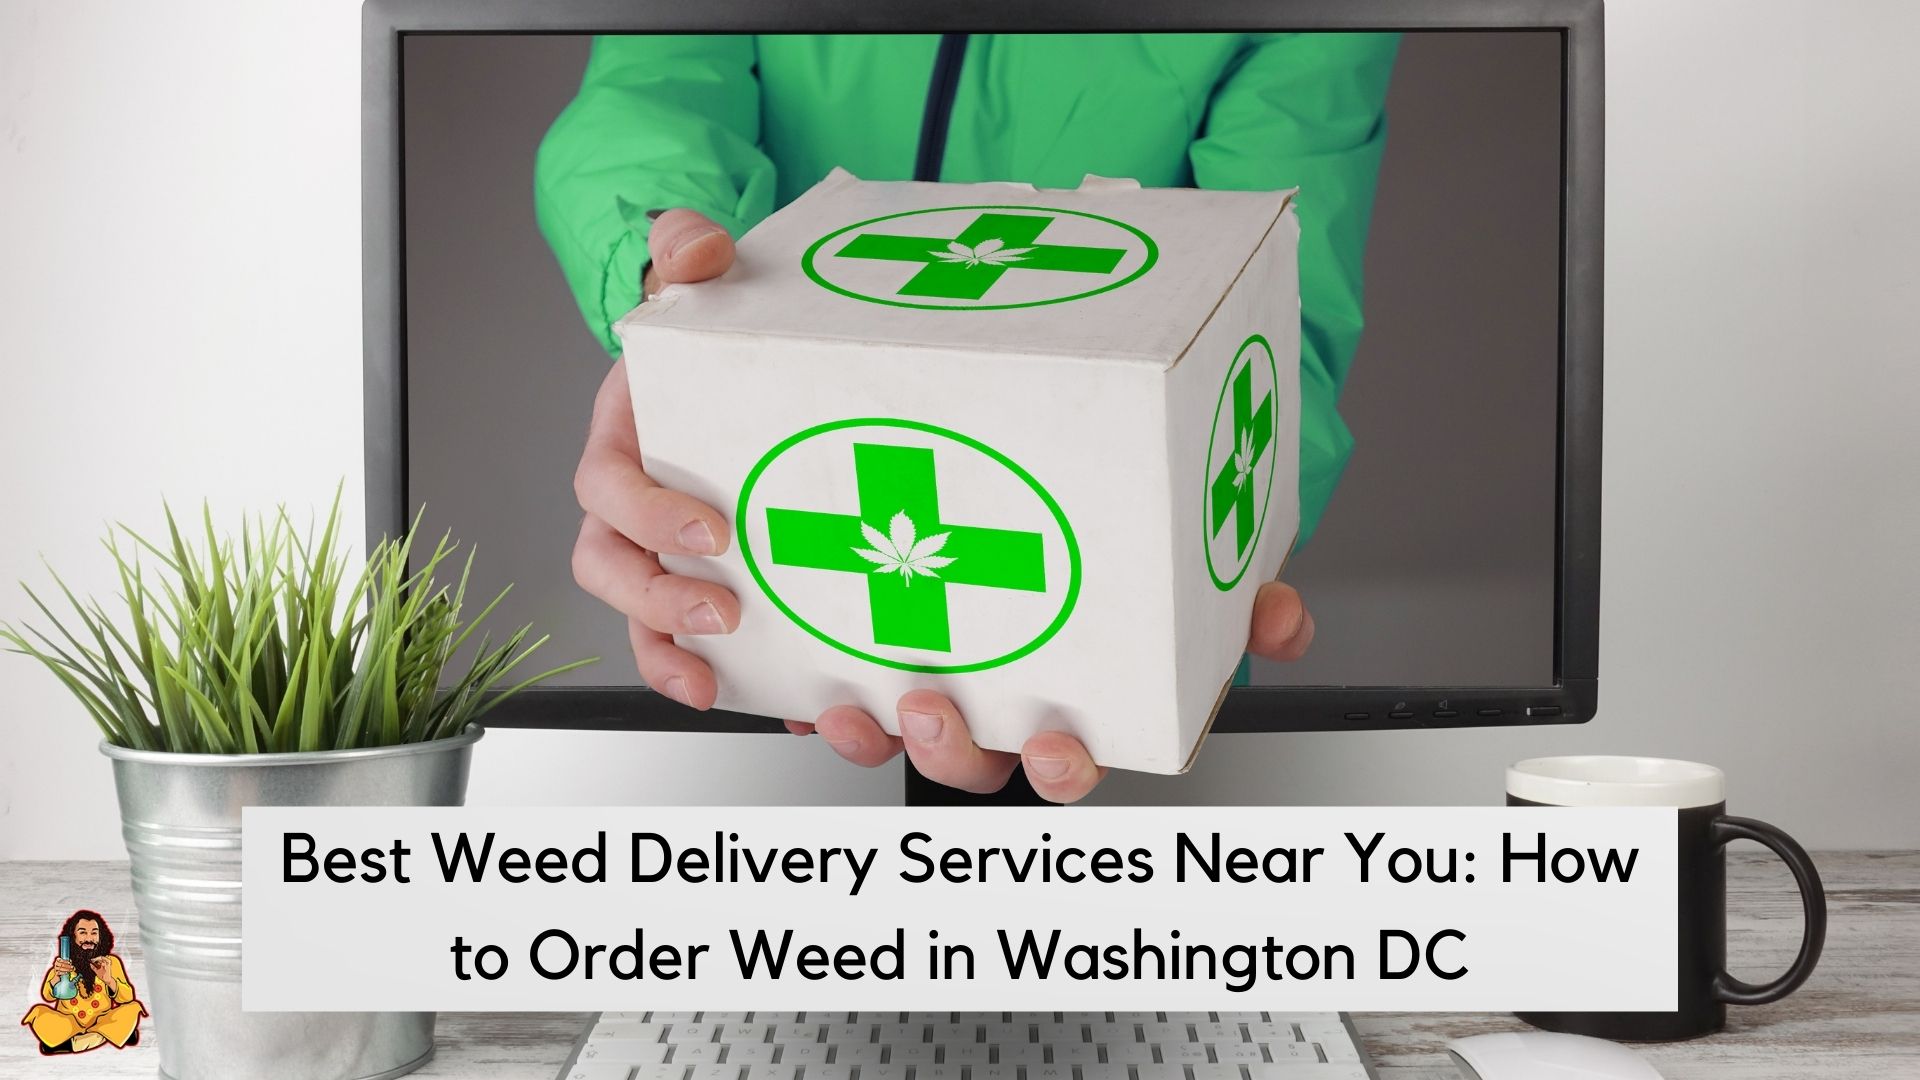 Best Weed Delivery Services in Washington DC